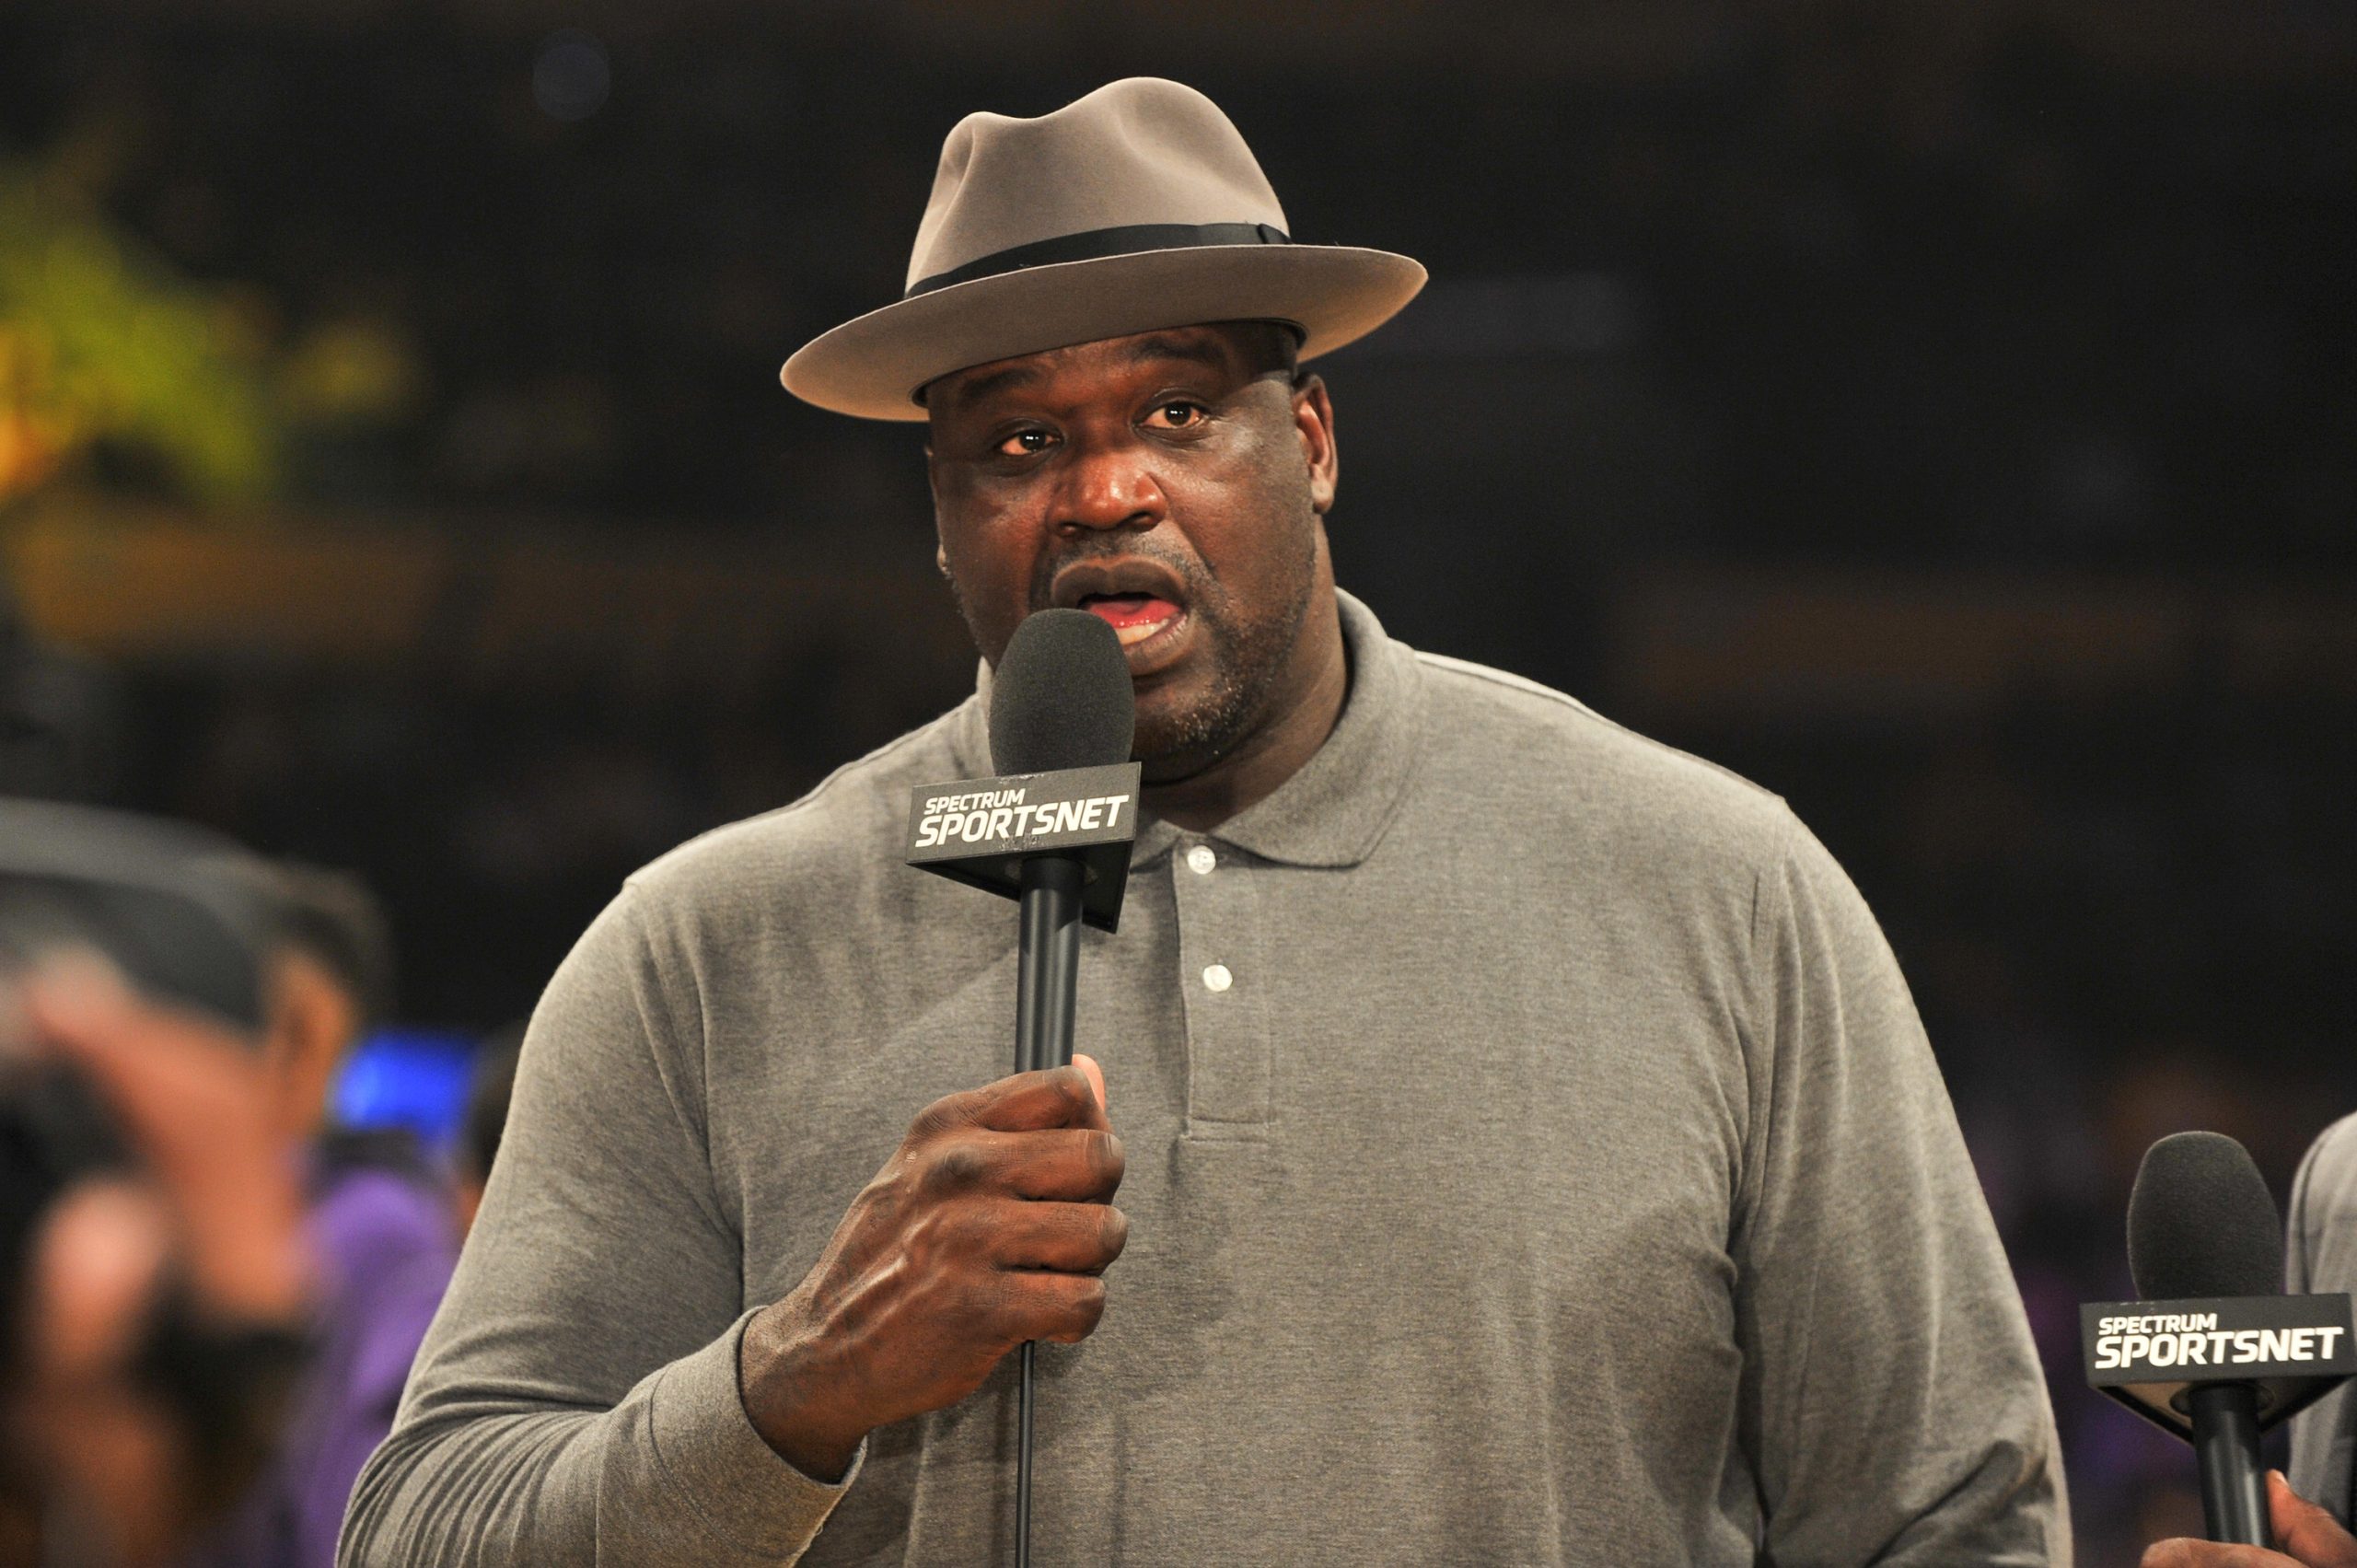 Shaquille O'Neal attends a basketball game between the Los Angeles Lakers and the Golden State Warriors.